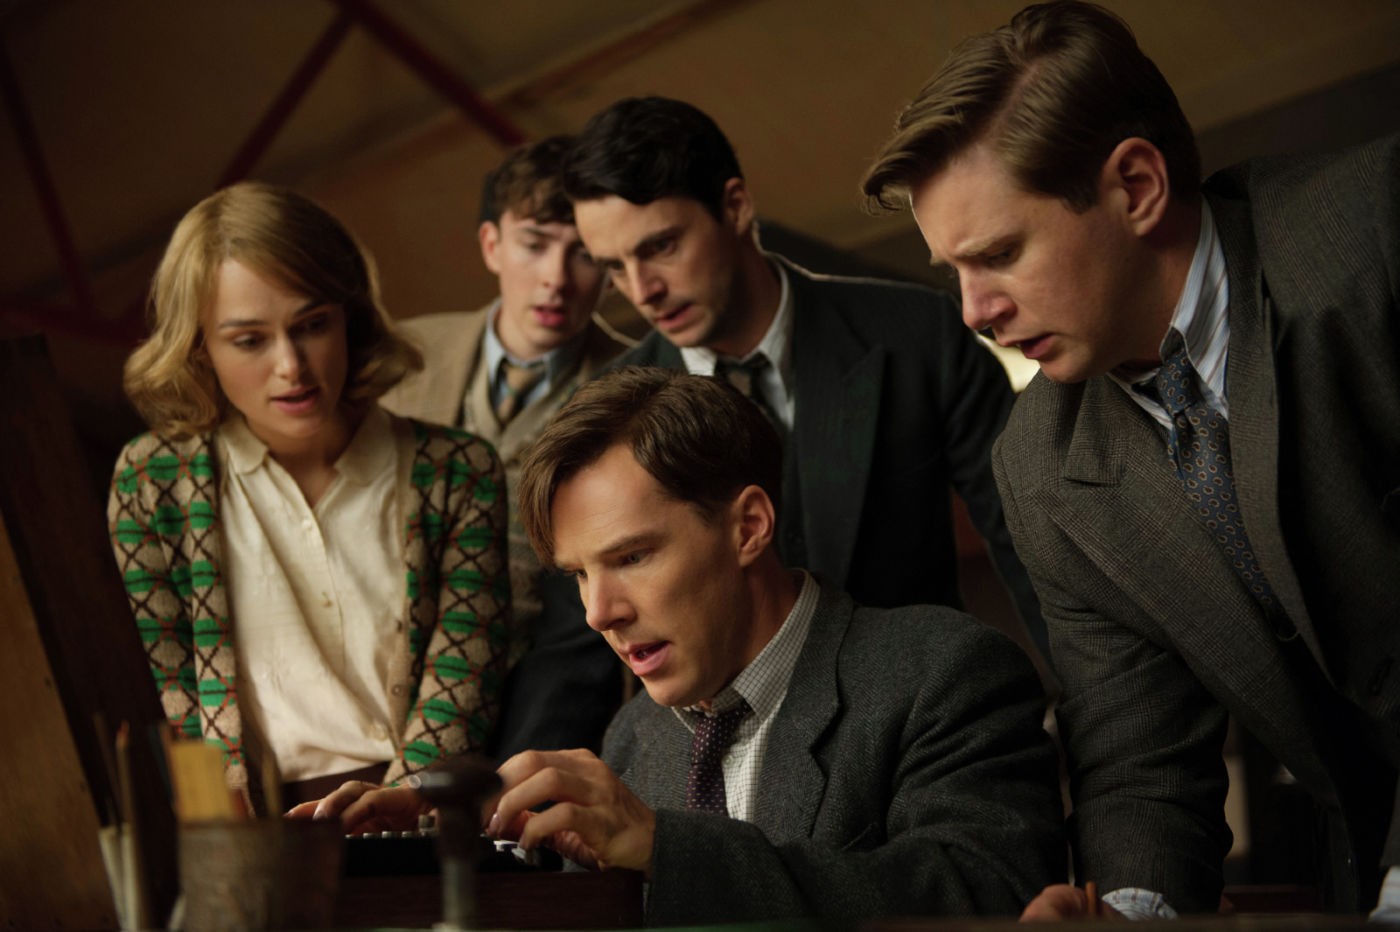 Keira Knightley, Benedict Cumberbatch and Matthew Goode in The Weinstein Company's The Imitation Game (2014)